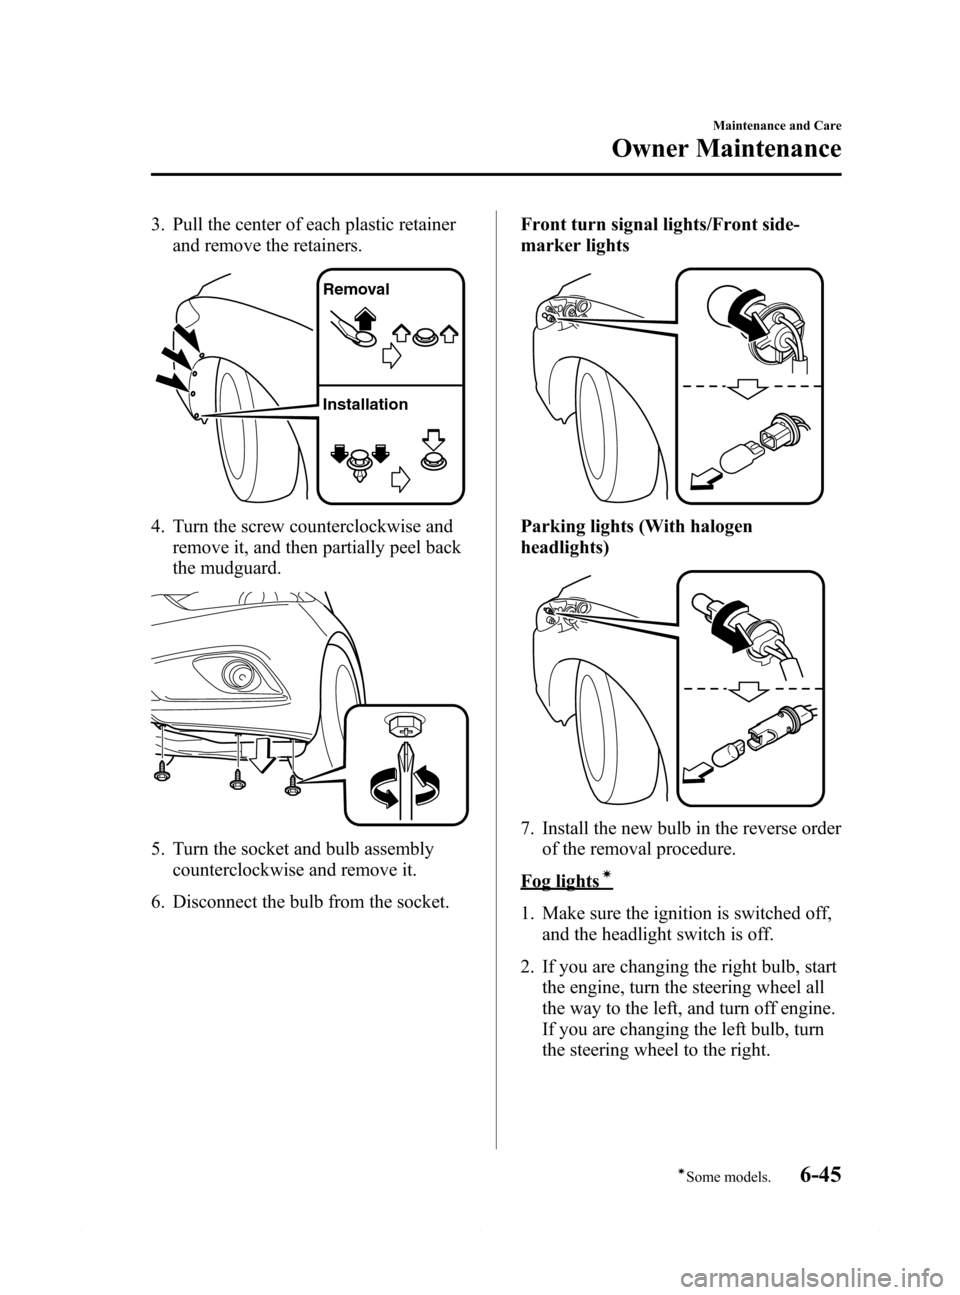 MAZDA MODEL 6 2014  Owners Manual (in English) Black plate (439,1)
3. Pull the center of each plastic retainer
and remove the retainers.
Removal
Installation
4. Turn the screw counterclockwise and
remove it, and then partially peel back
the mudgua